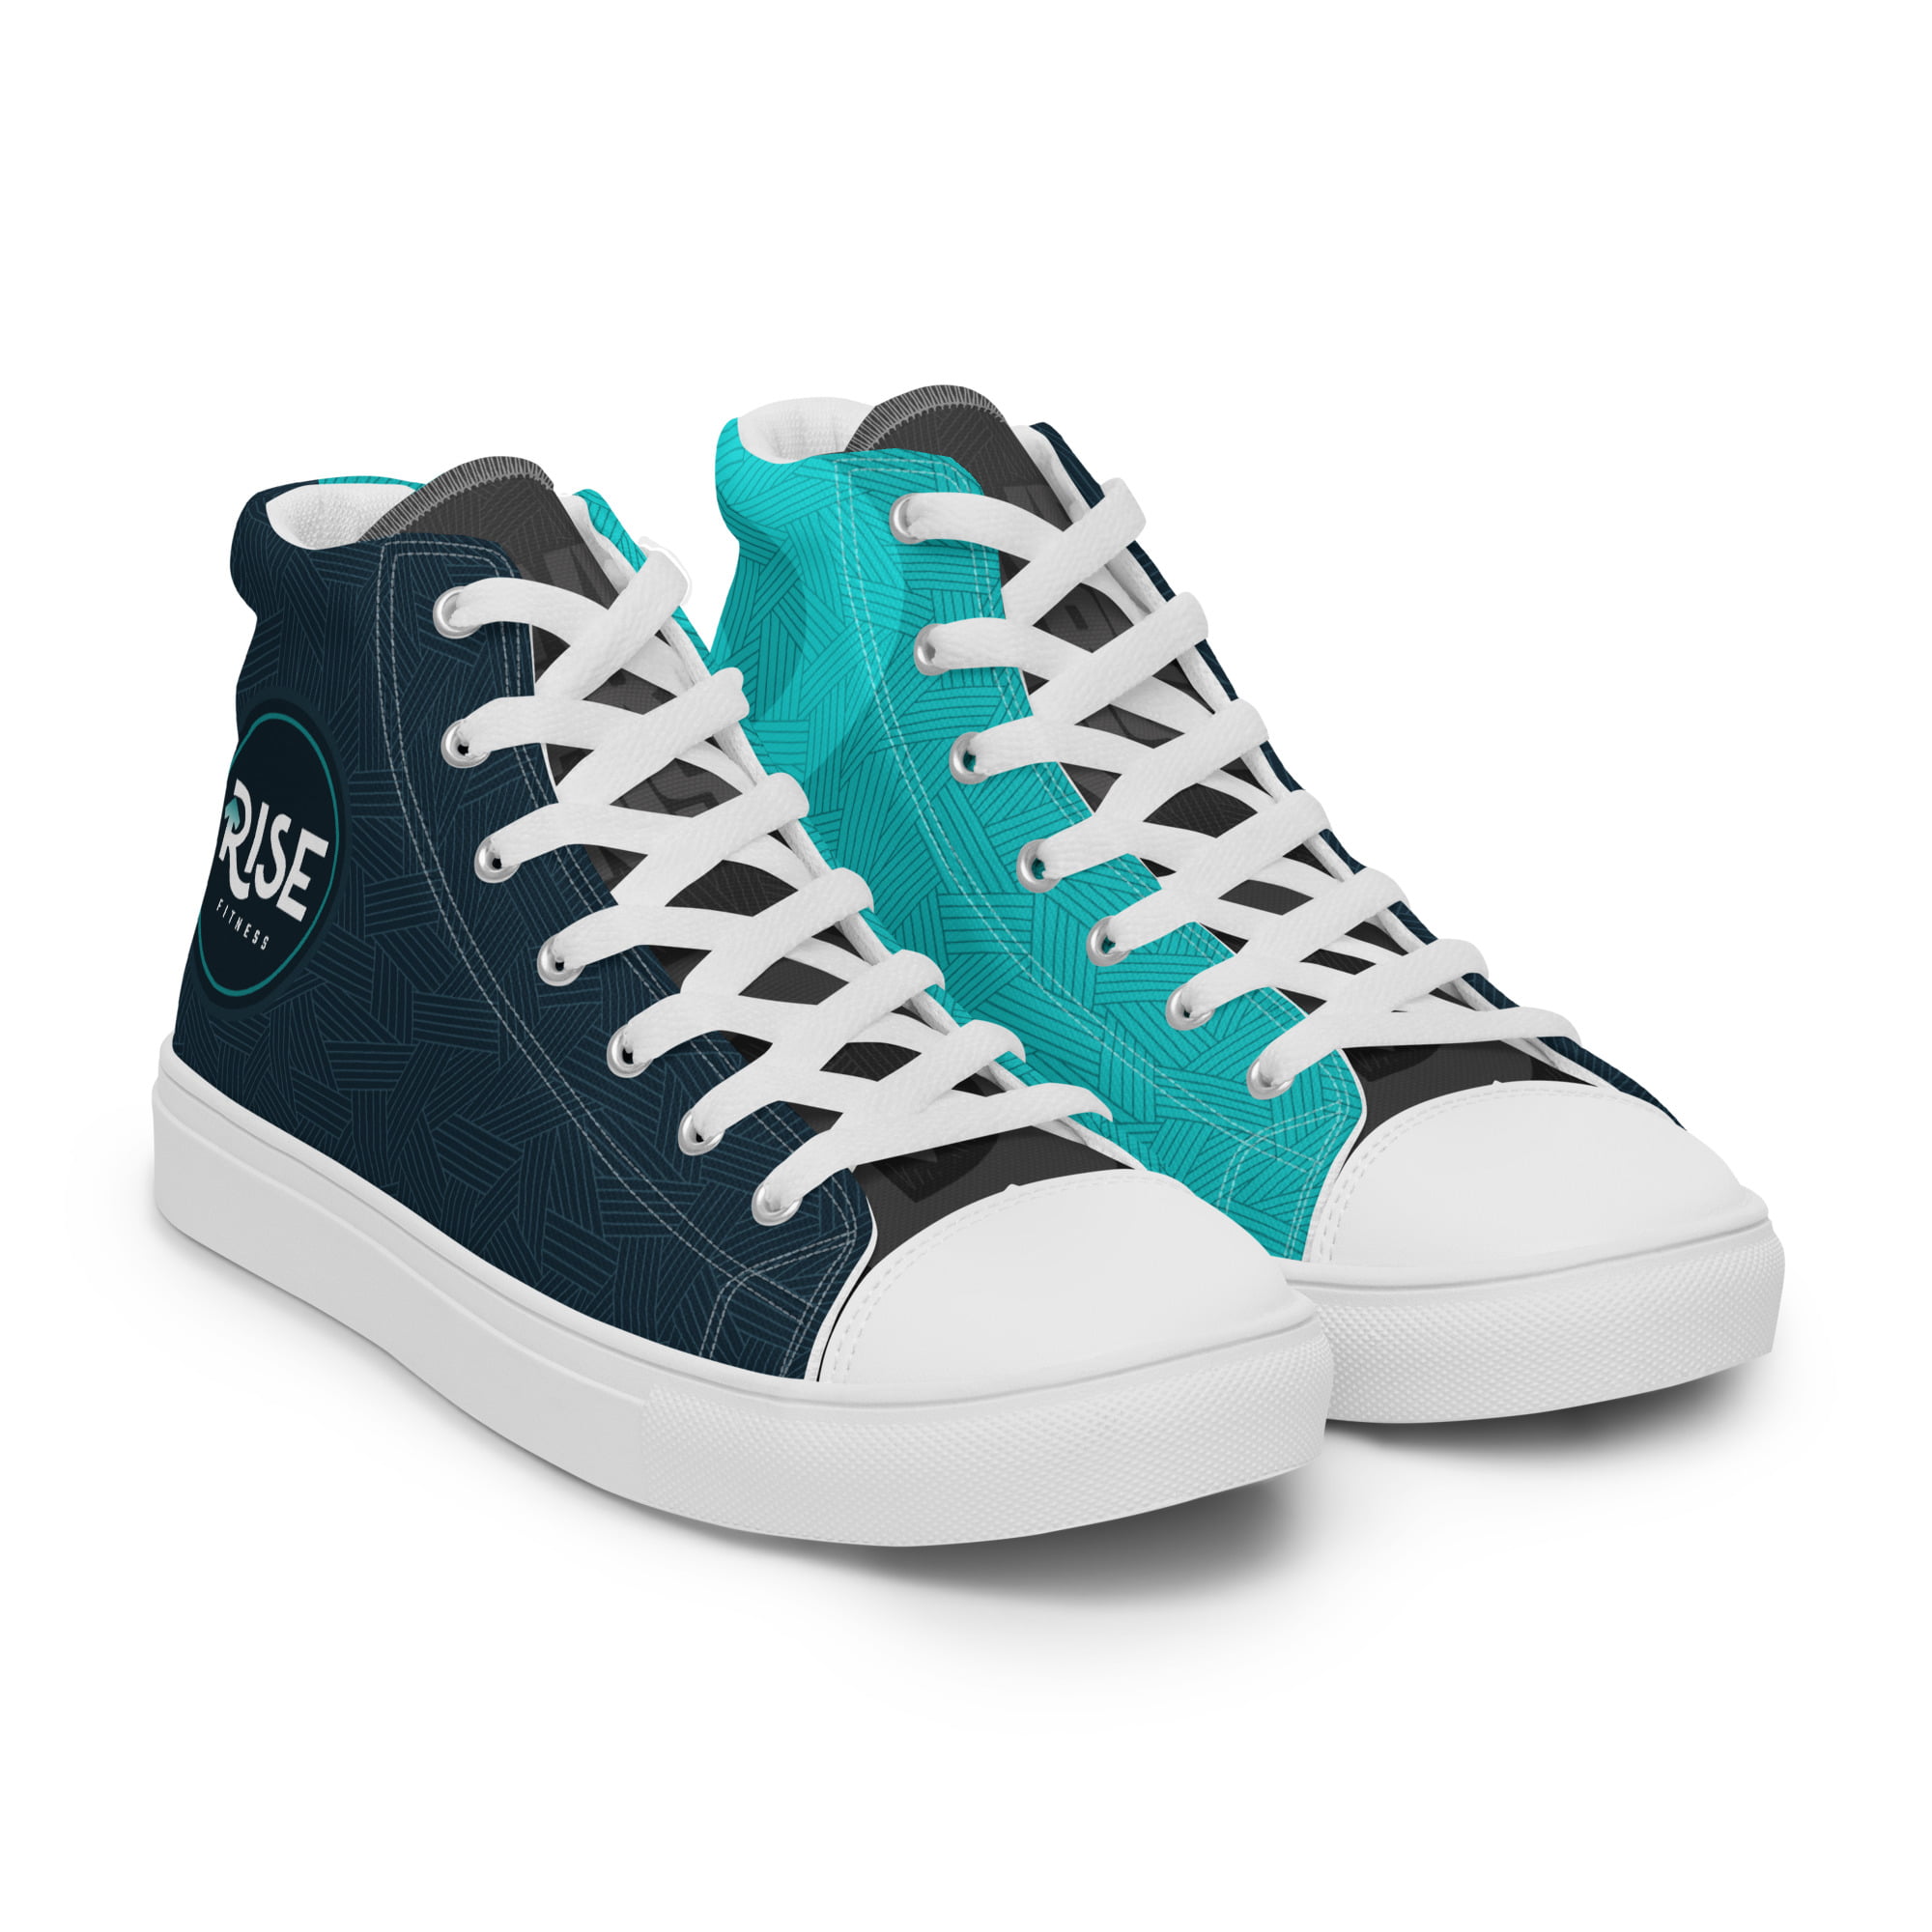 Women’s high top canvas shoes - Ability Ministry